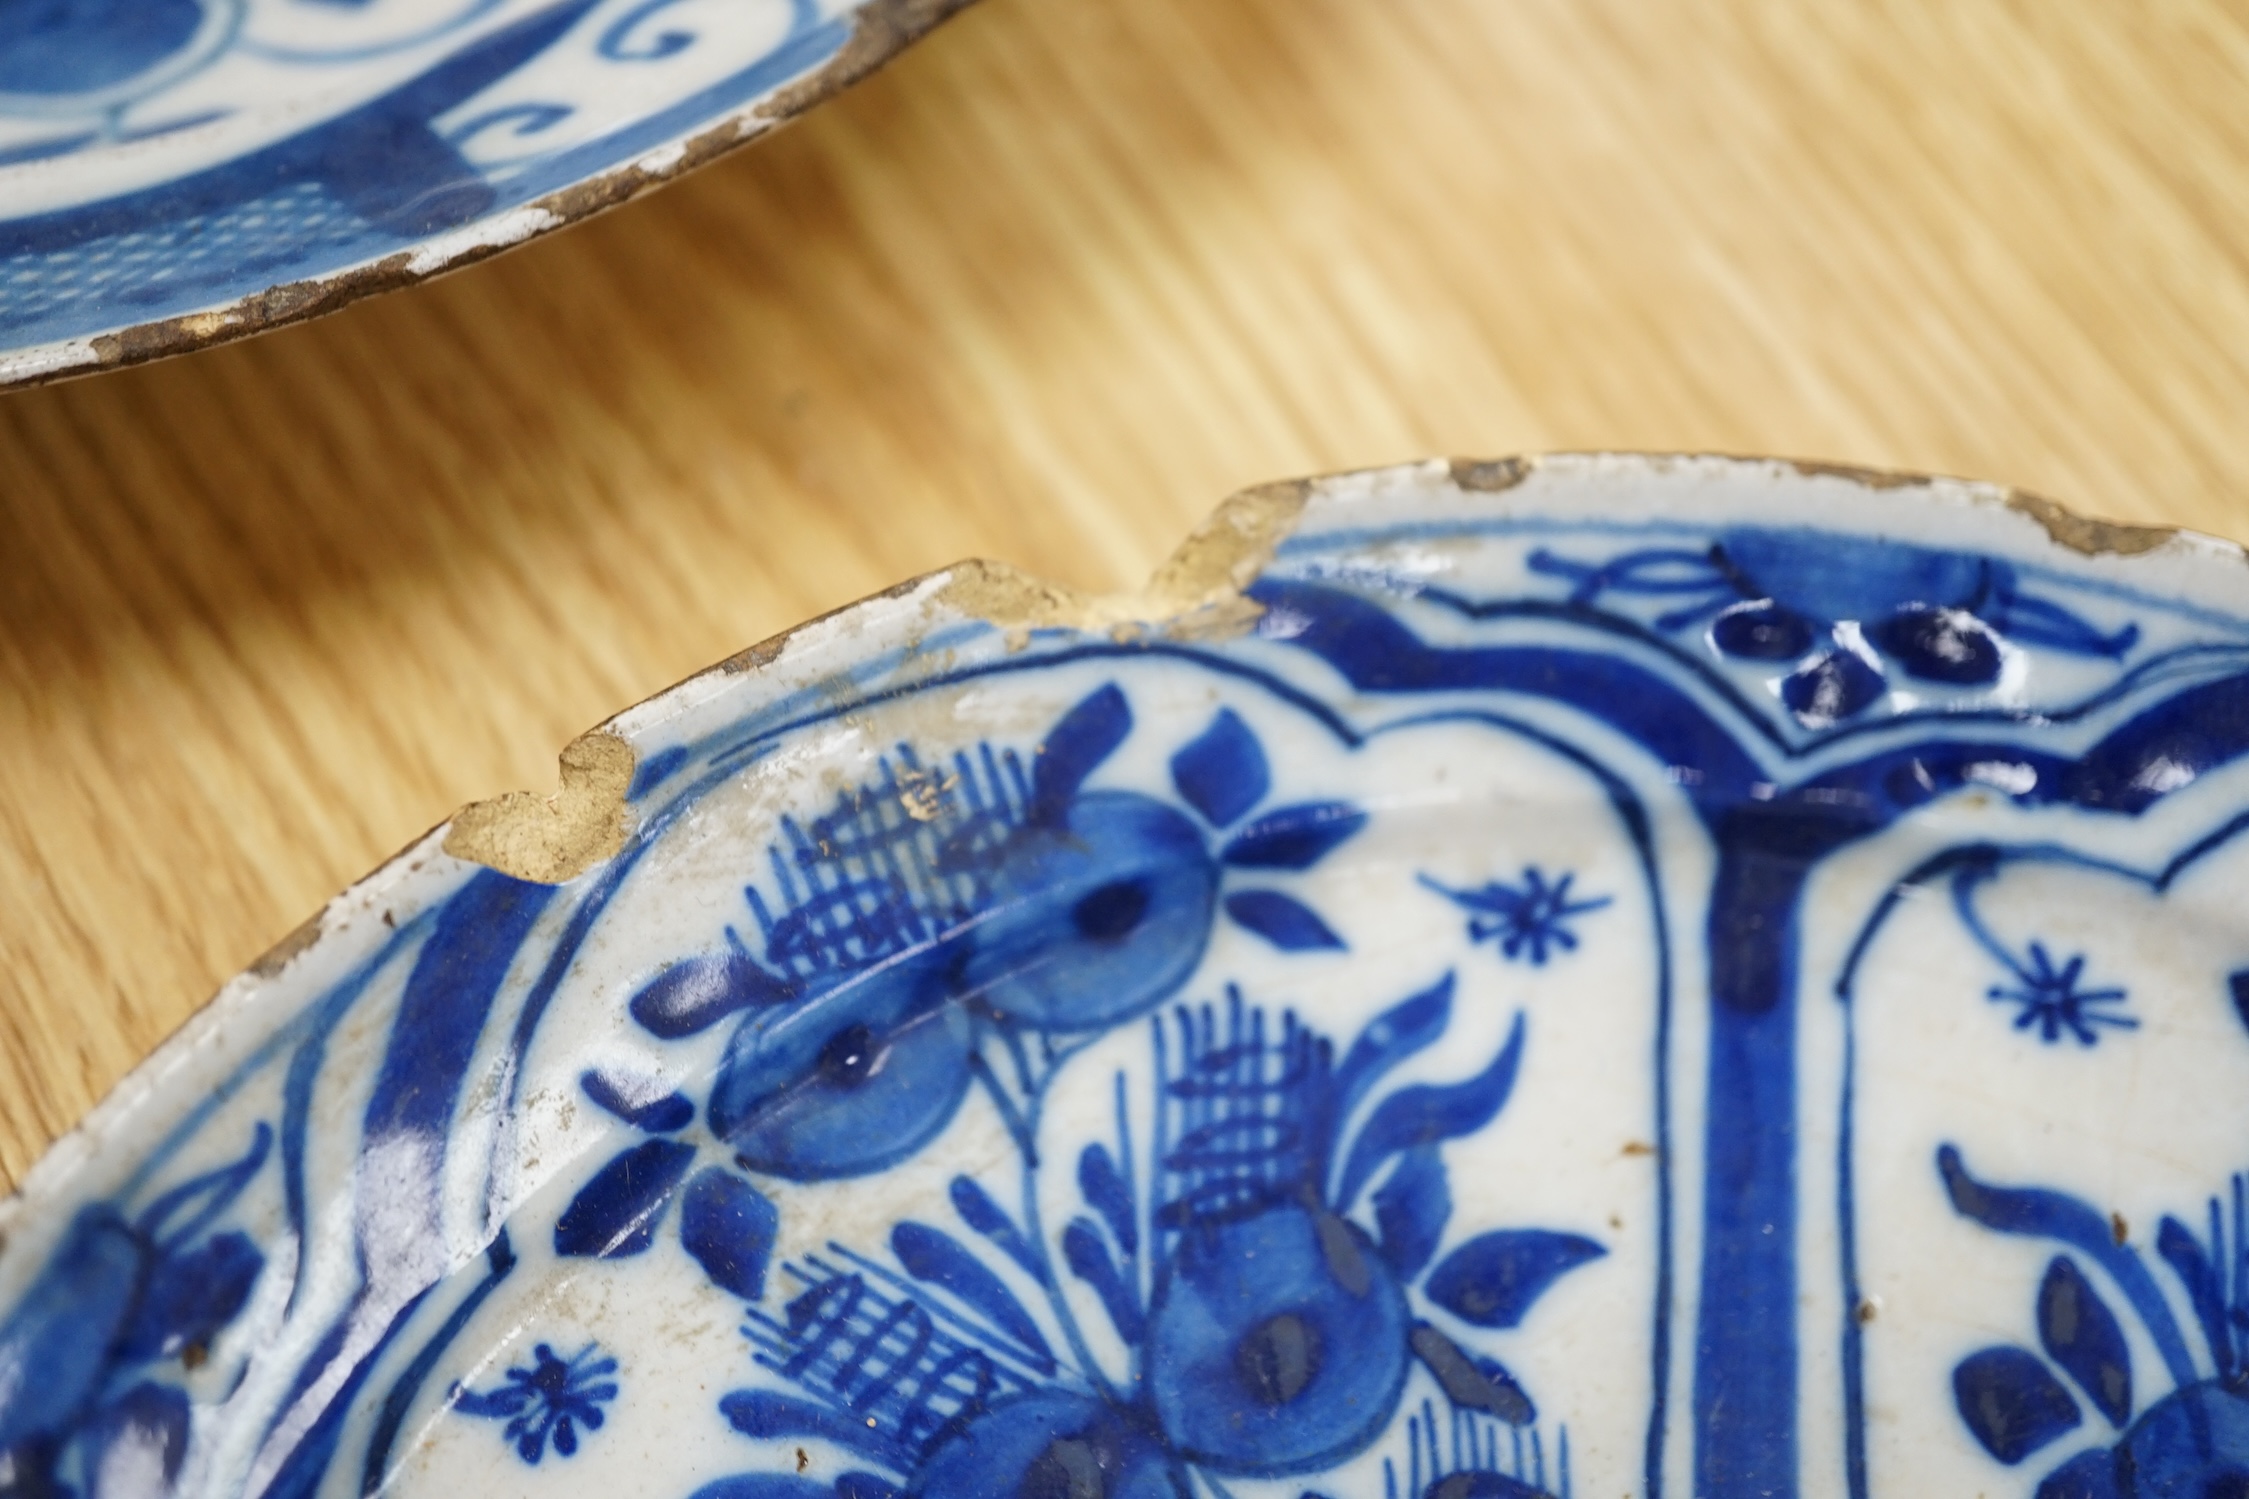 Four various continental delftware dishes, 18th and 19th century, largest 31cm diameter. Condition - various cracks and chipping to edges